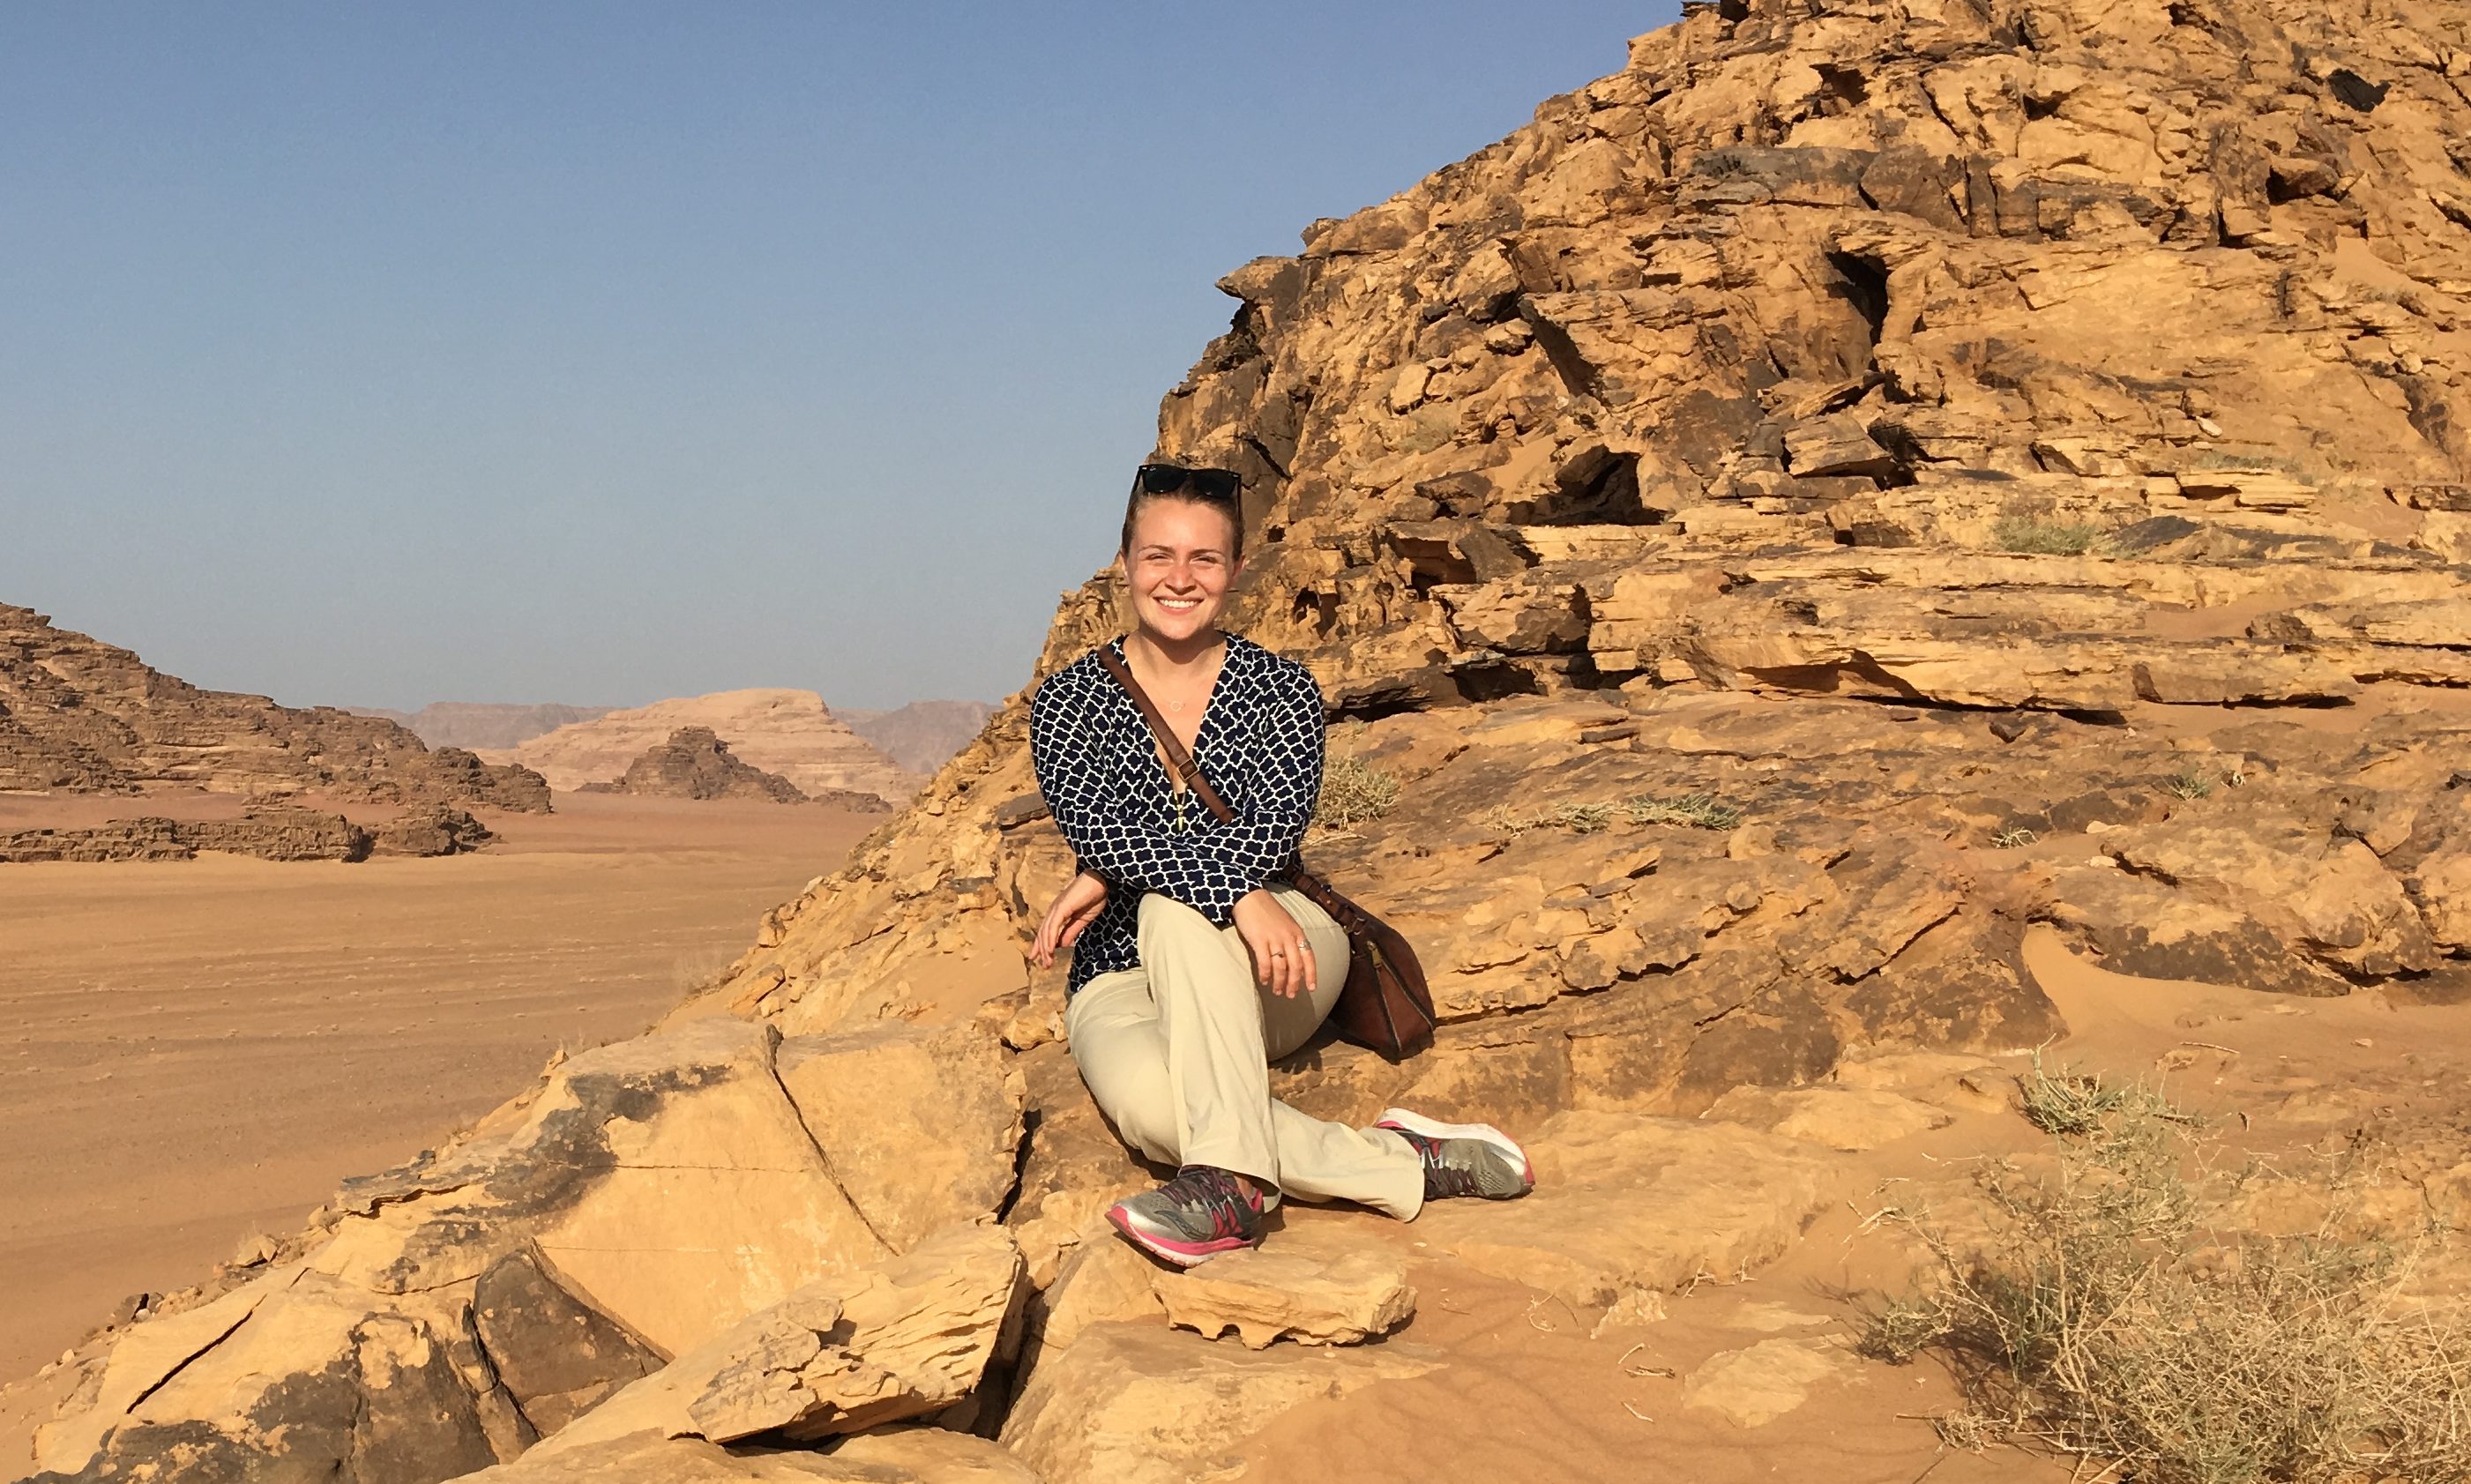 Dr. Sara Ann Knutson in the Wadi Rum, Jordan. She wears a black shirt with white line patterns, khaki pants, and white, silver, and pink running shoes. She smiles and sits on a pile of sand stone with one leg crossed in front of the other.